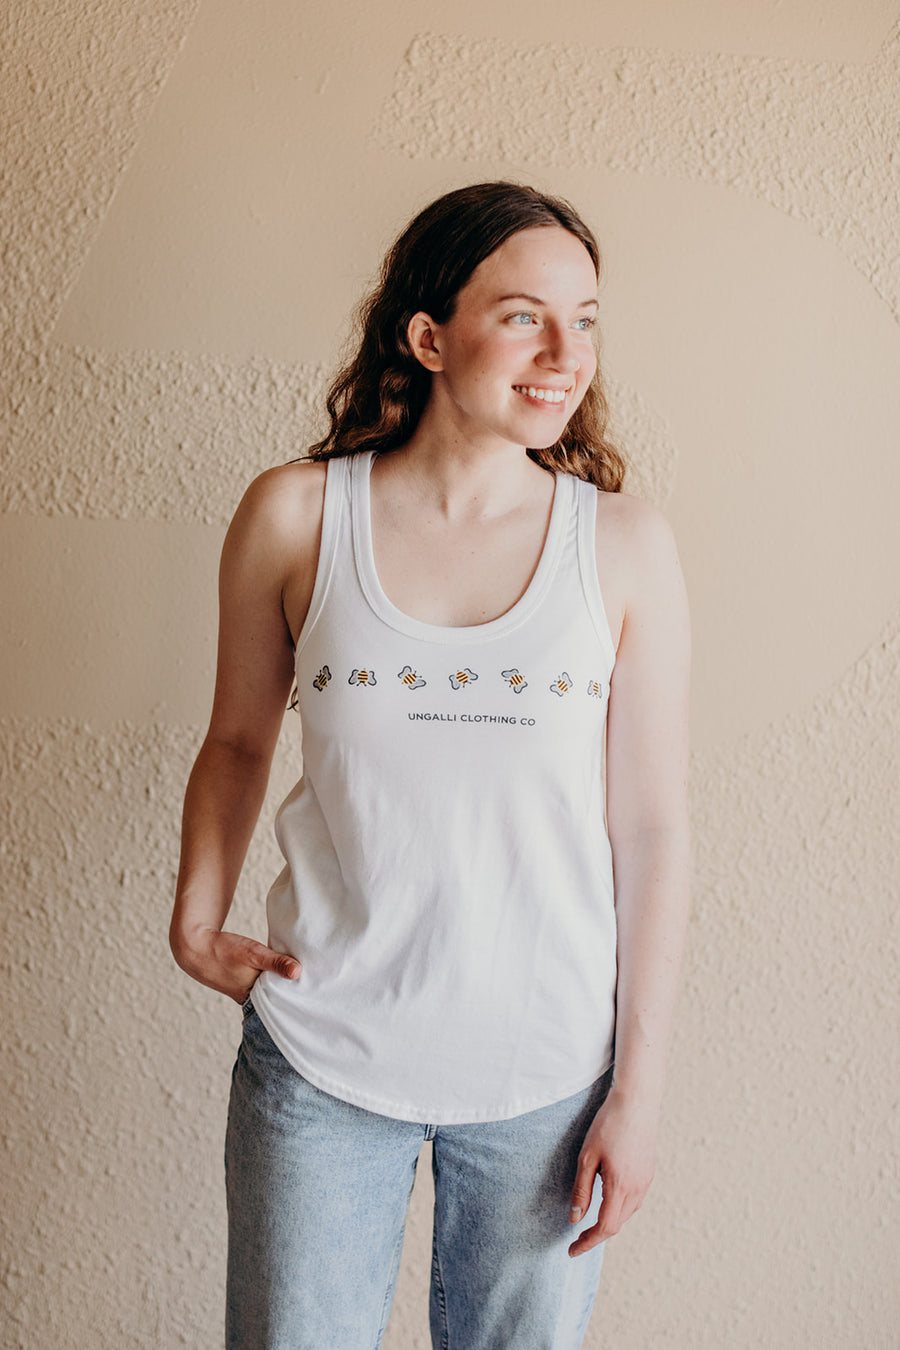 Women's recycled white tank top with bee print across front